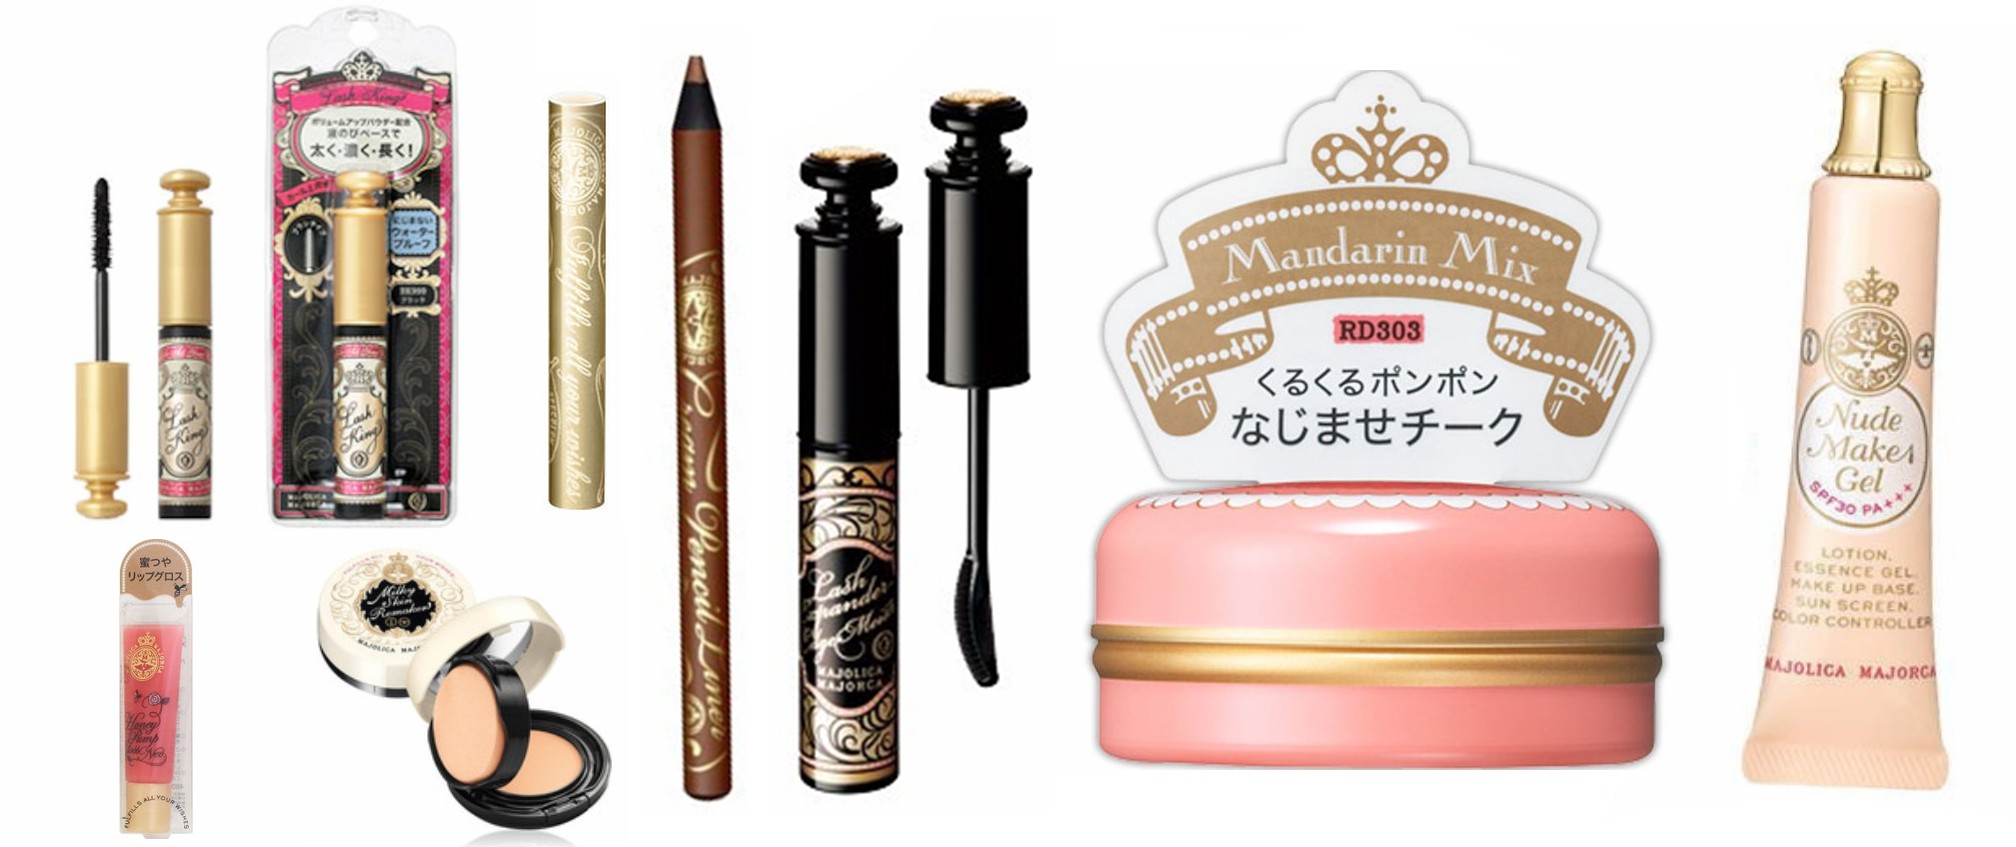 10 Best Japanese Makeup Brands You May Not Know About | One Map by FROM JAPAN